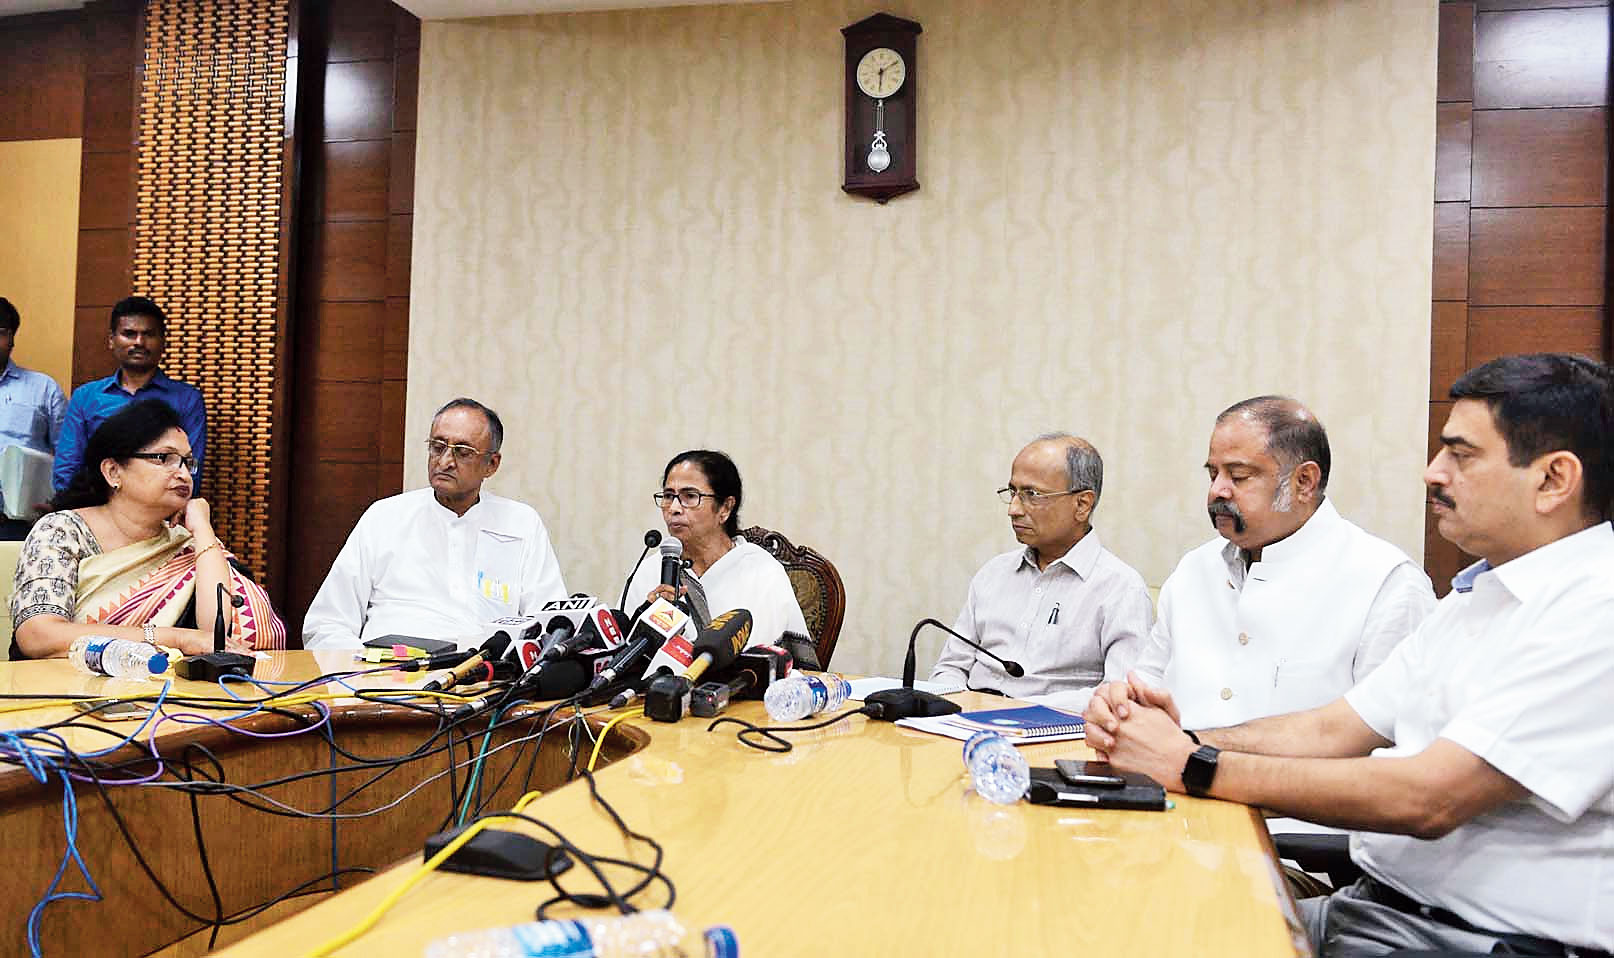 Chief minister Mamata Banerjee flanked by Chandrima Bhattacharya and Amit Mitra (on the left) and Anuj Sharma, Rajiva Sinha and Malay De (on the right) at Nabanna on Saturday. 

